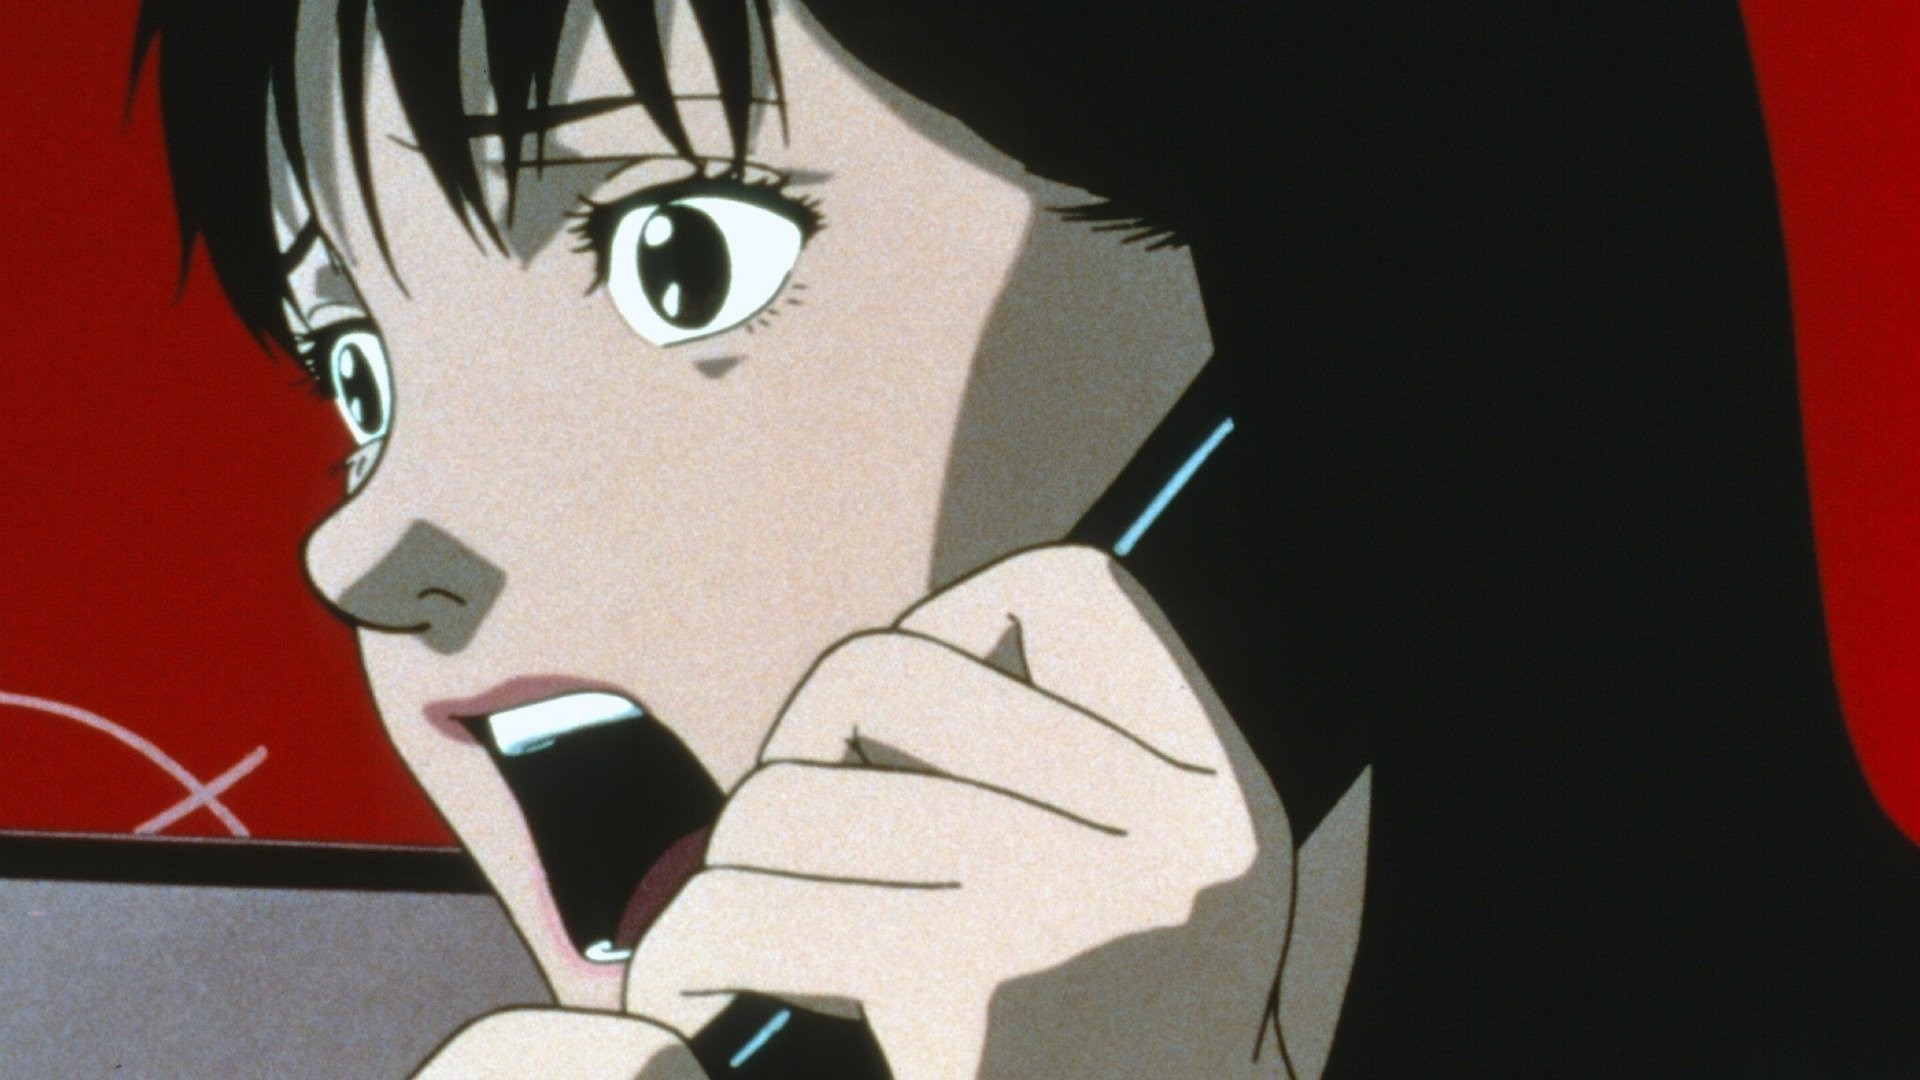 Perfect Blue 1997, directed by Satoshi Kon | Film review